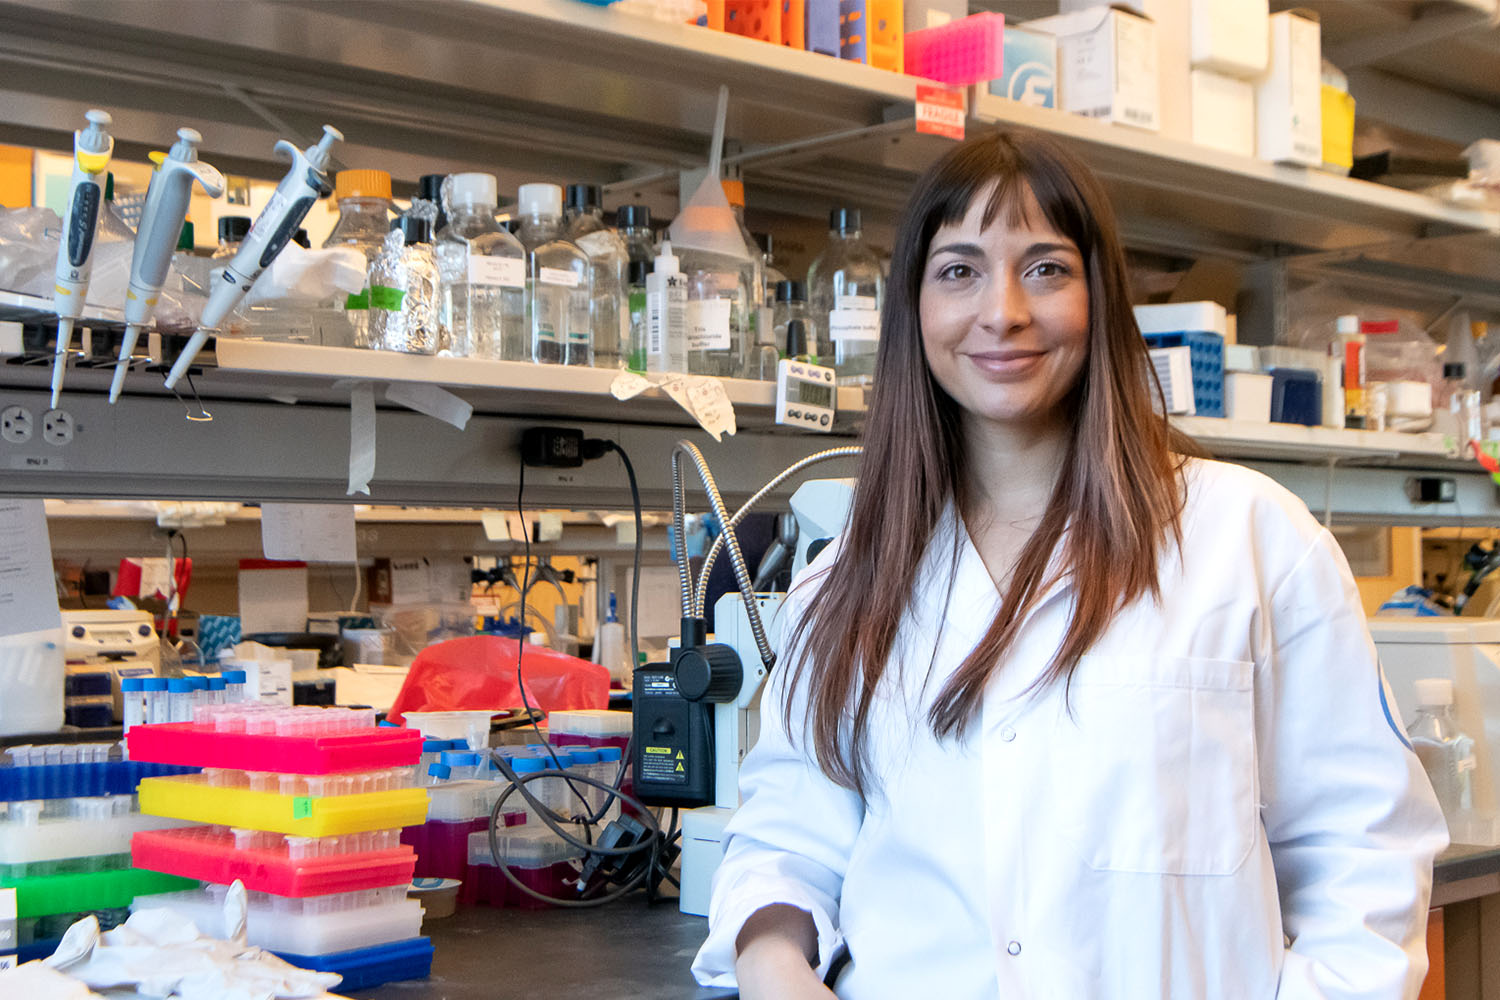 Alejandra Mendoza, Ph.D., a CRI-Bristol Myers Squibb Fellow in the lab of Alexander Y. Rudensky, Ph.D., at Memorial Sloan Kettering Cancer Center, is researching how the activity of regulatory immune cells is mediated in the context of cancer and infection with the goal of identifying potential new targets for immunotherapy.